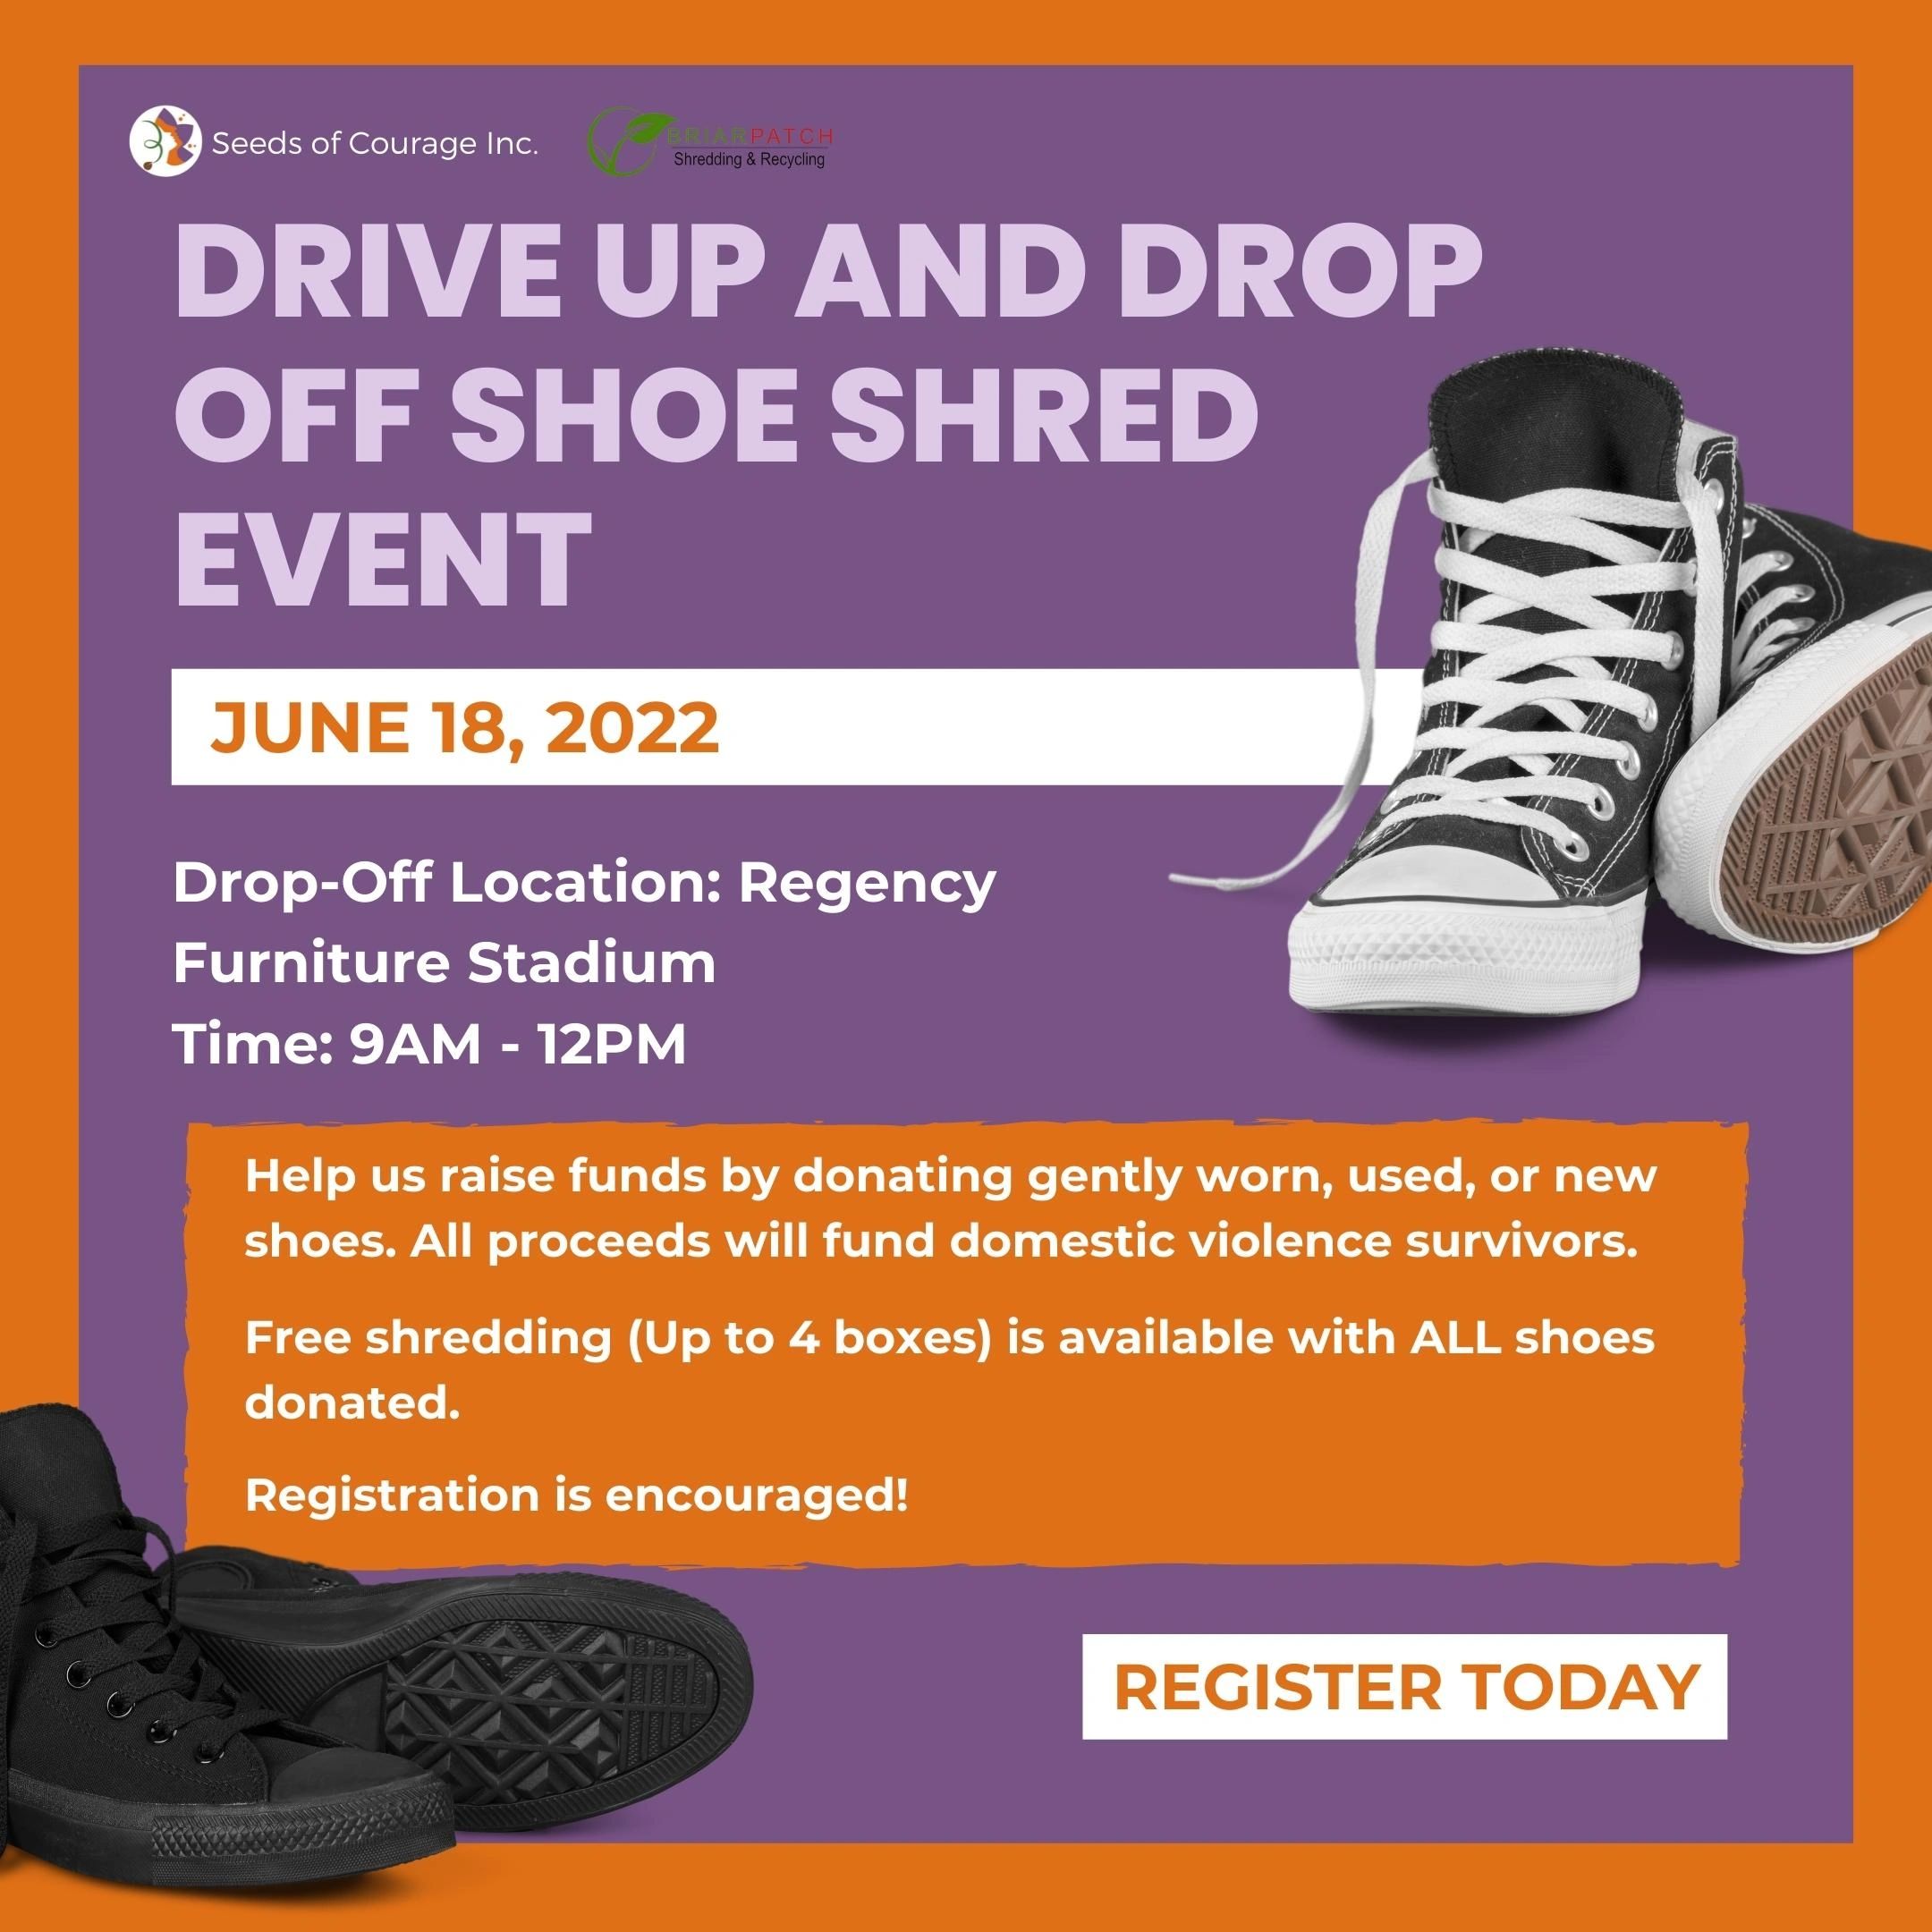 Fundraise for FDSF - First Day Shoe Fund